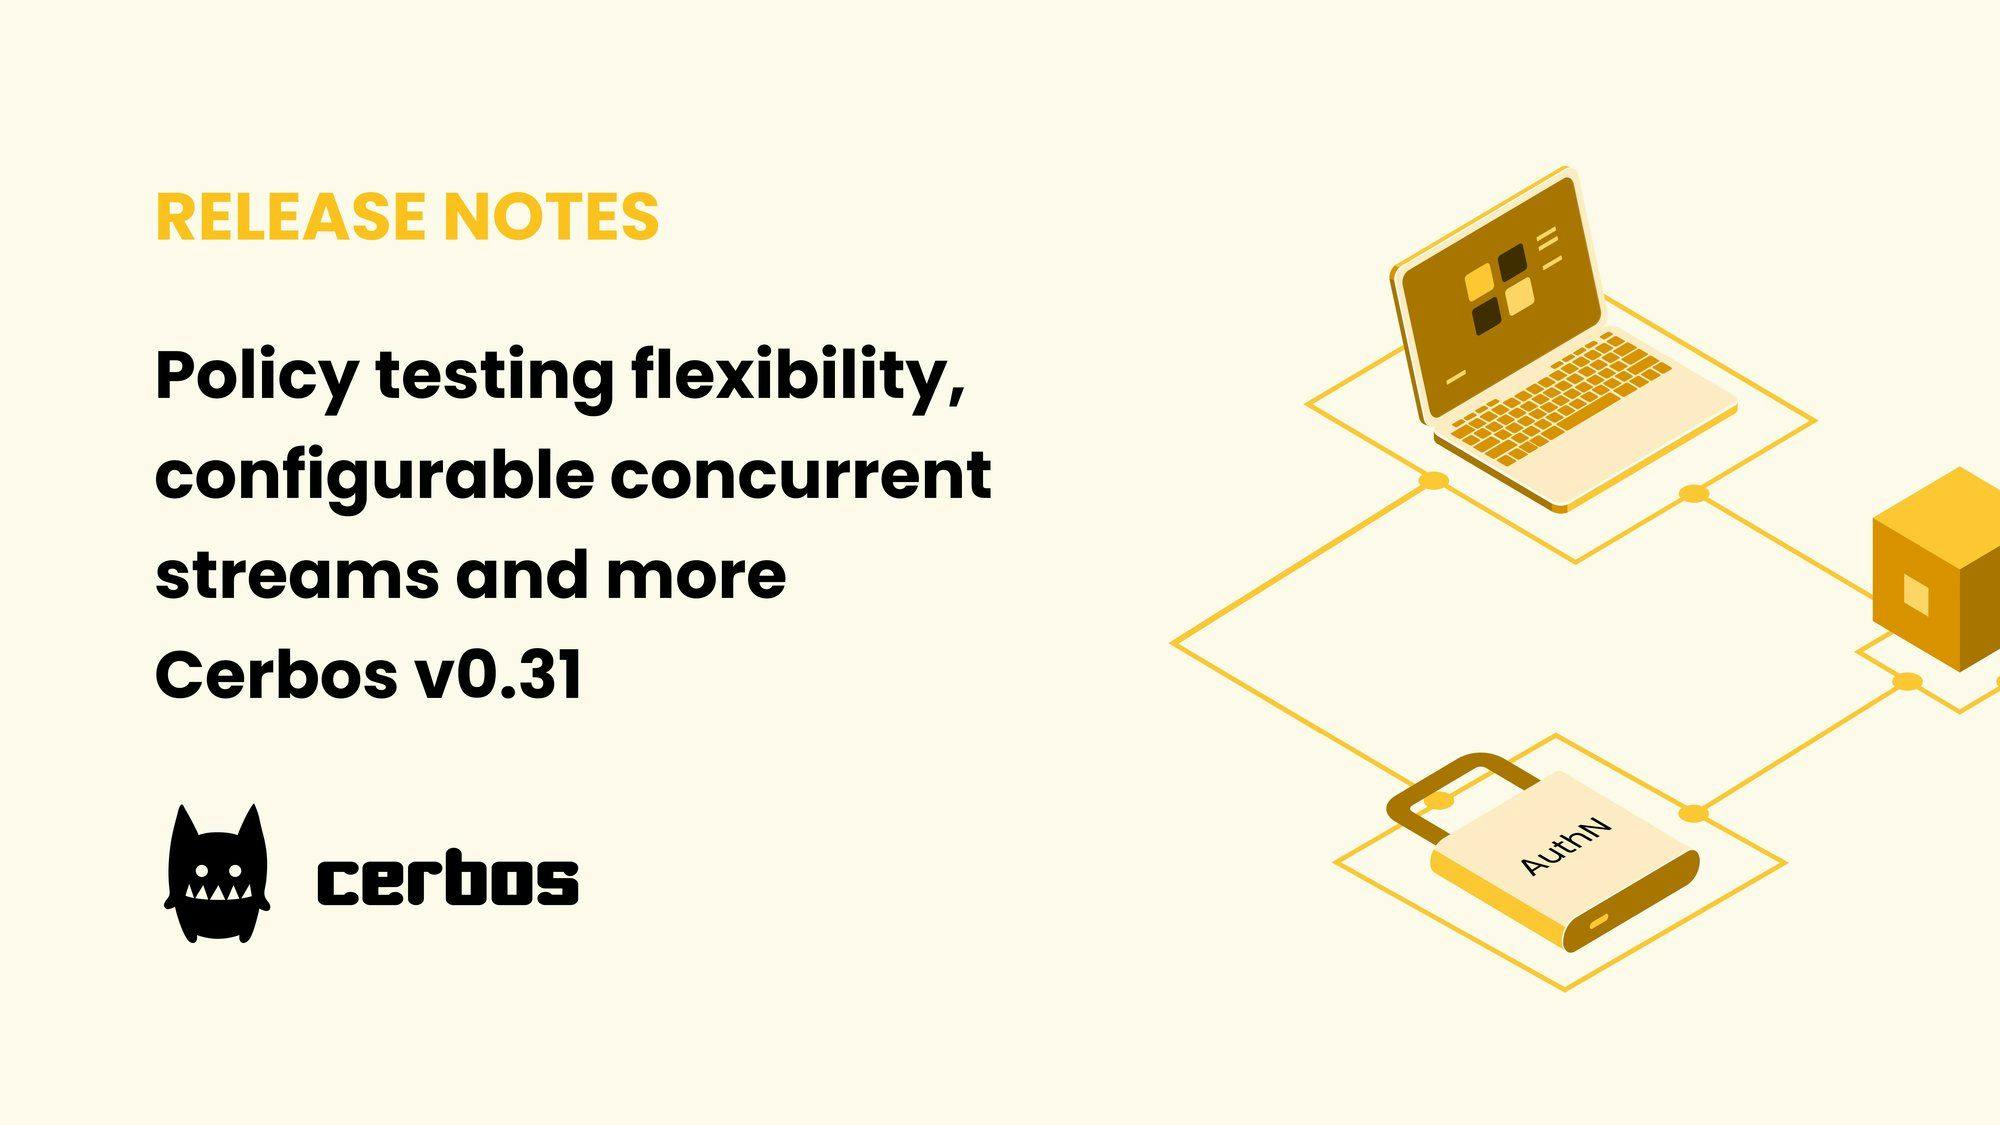 Policy testing flexibility, configurable concurrent streams, and more - Cerbos v0.31